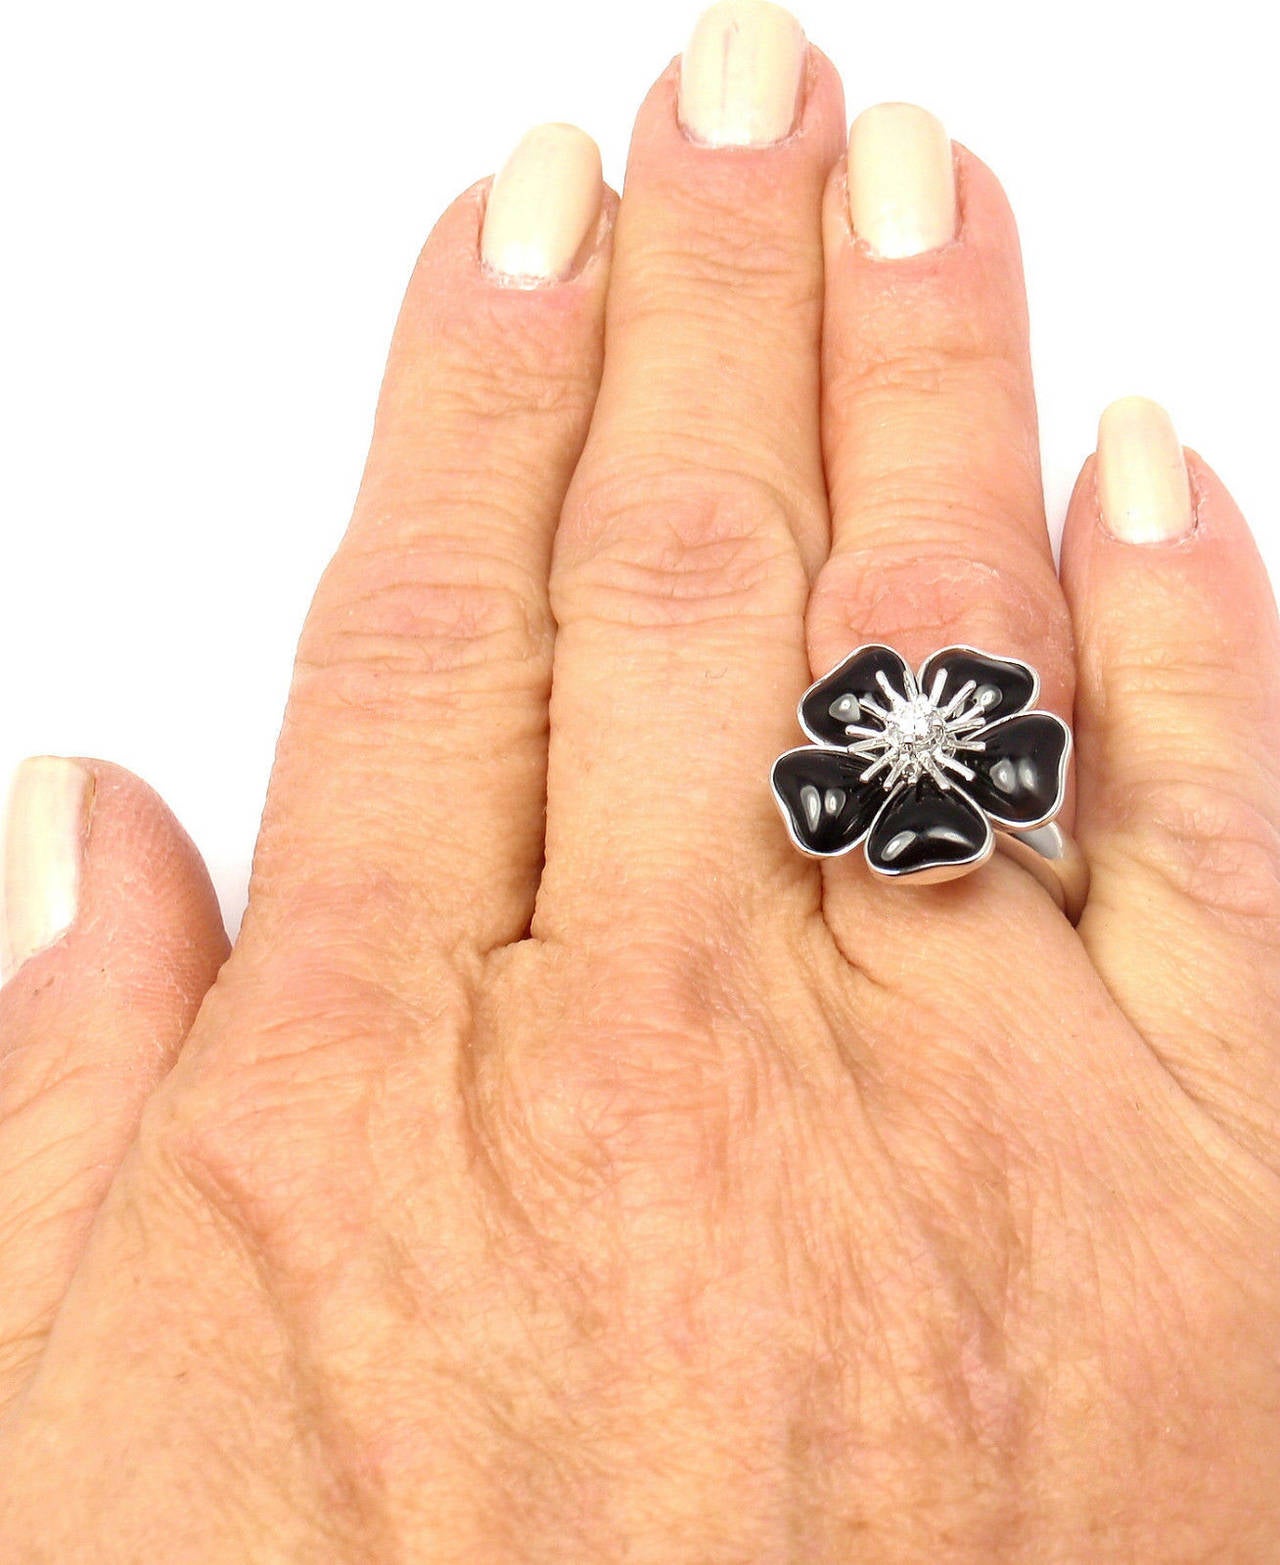 Van Cleef And Arpels Nerval Onyx Diamond Gold Flower Ring For Sale At 1stdibs 